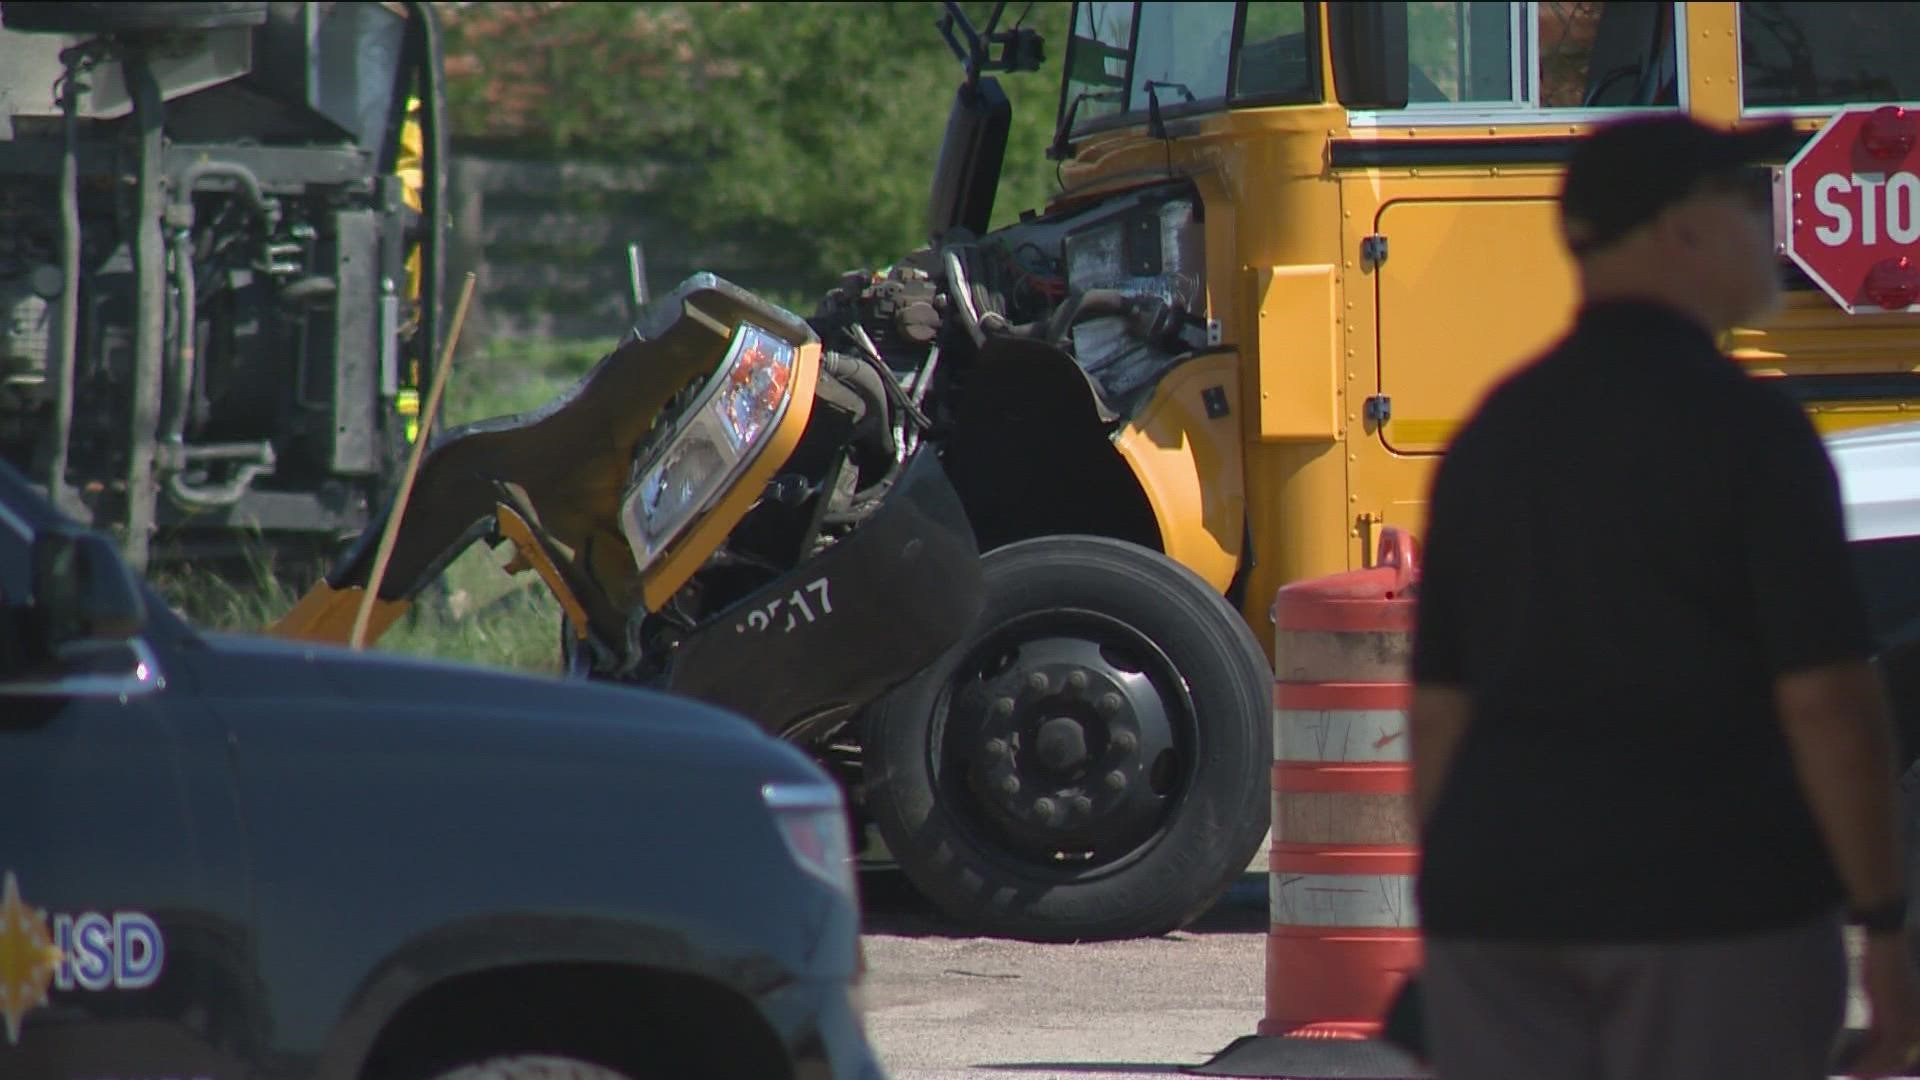 Leander police are investigating a crash between a FedEx truck and a school bus.